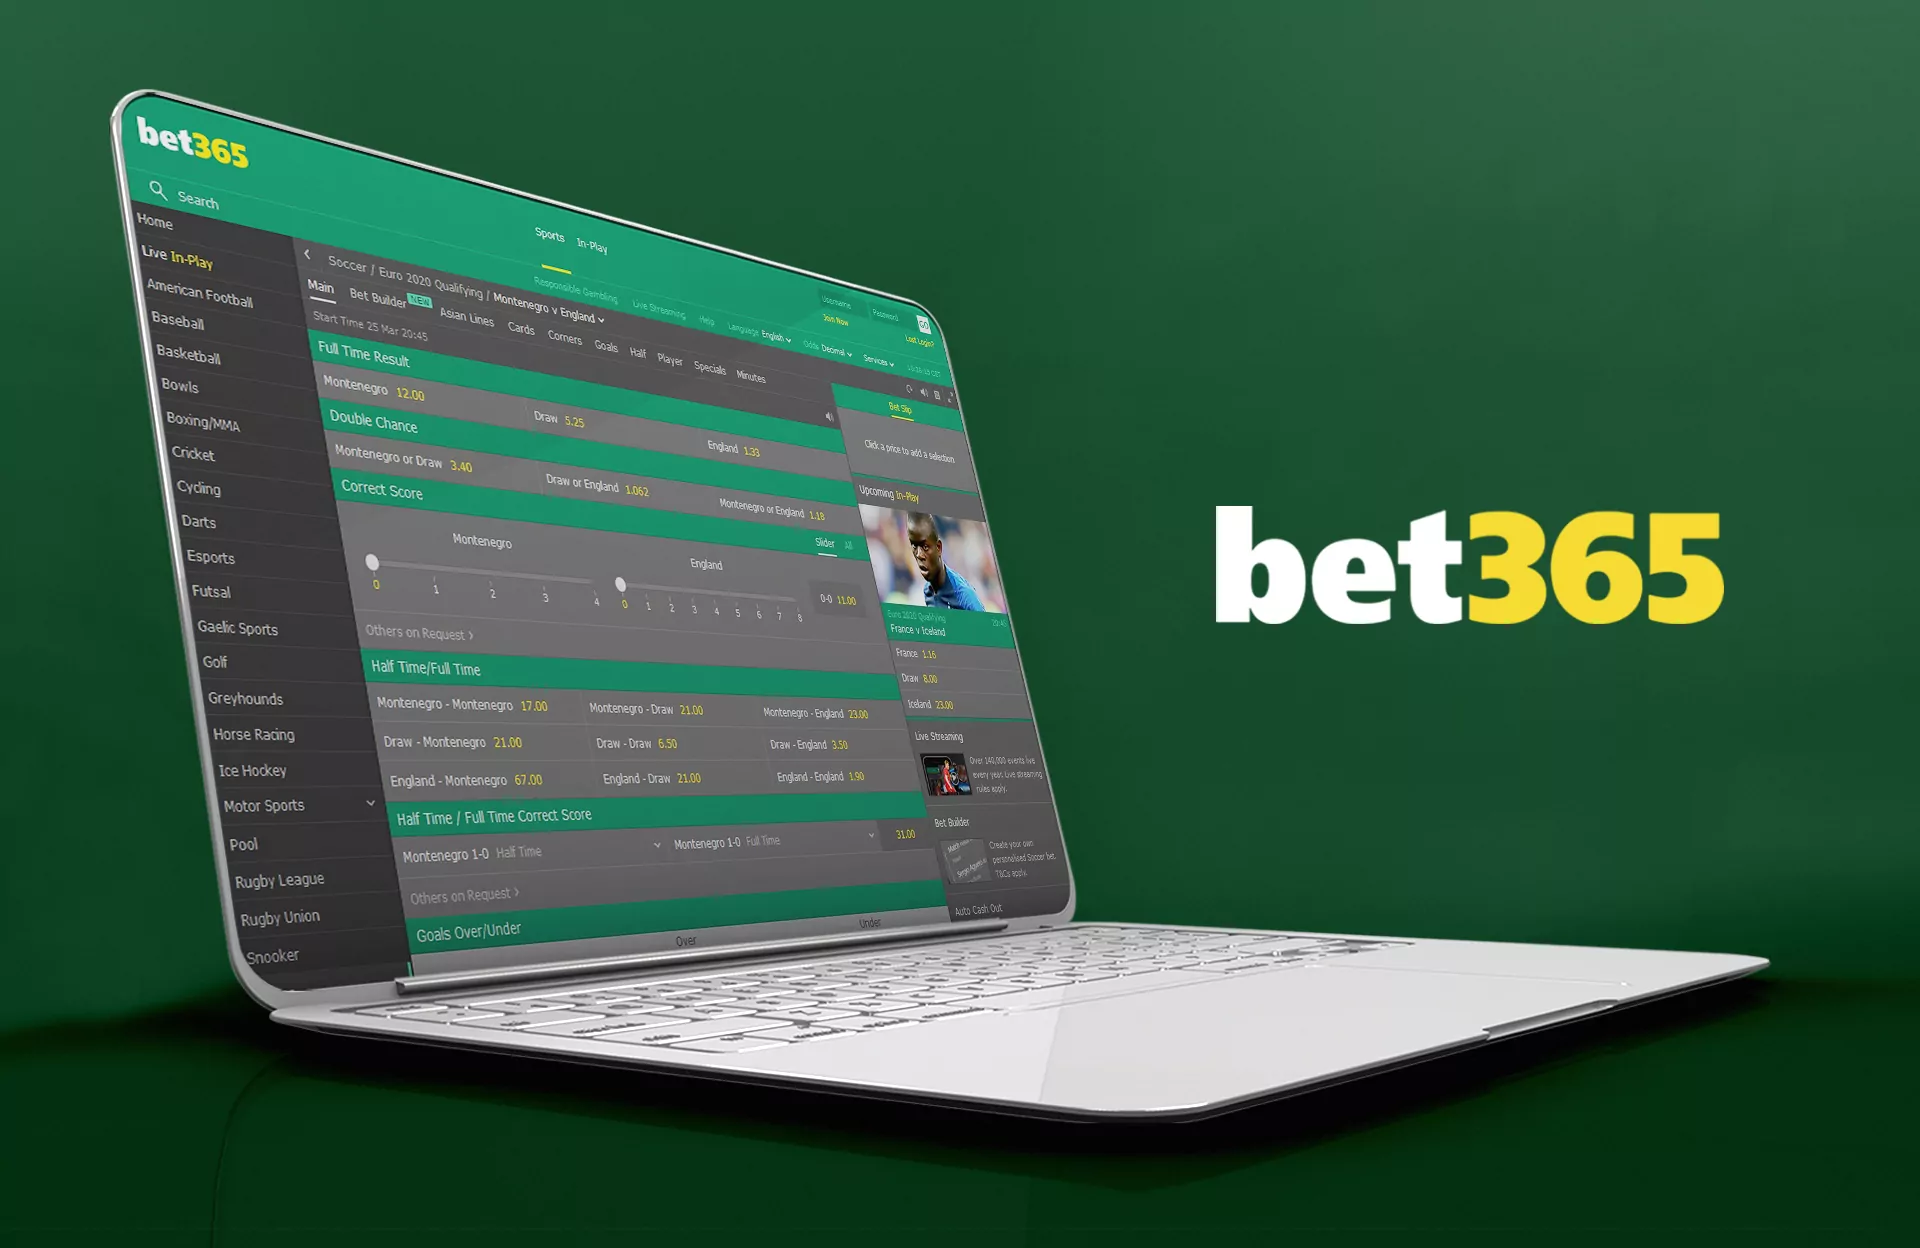 Bet365 focuses on live betting and provides welcome bonuses to new users.